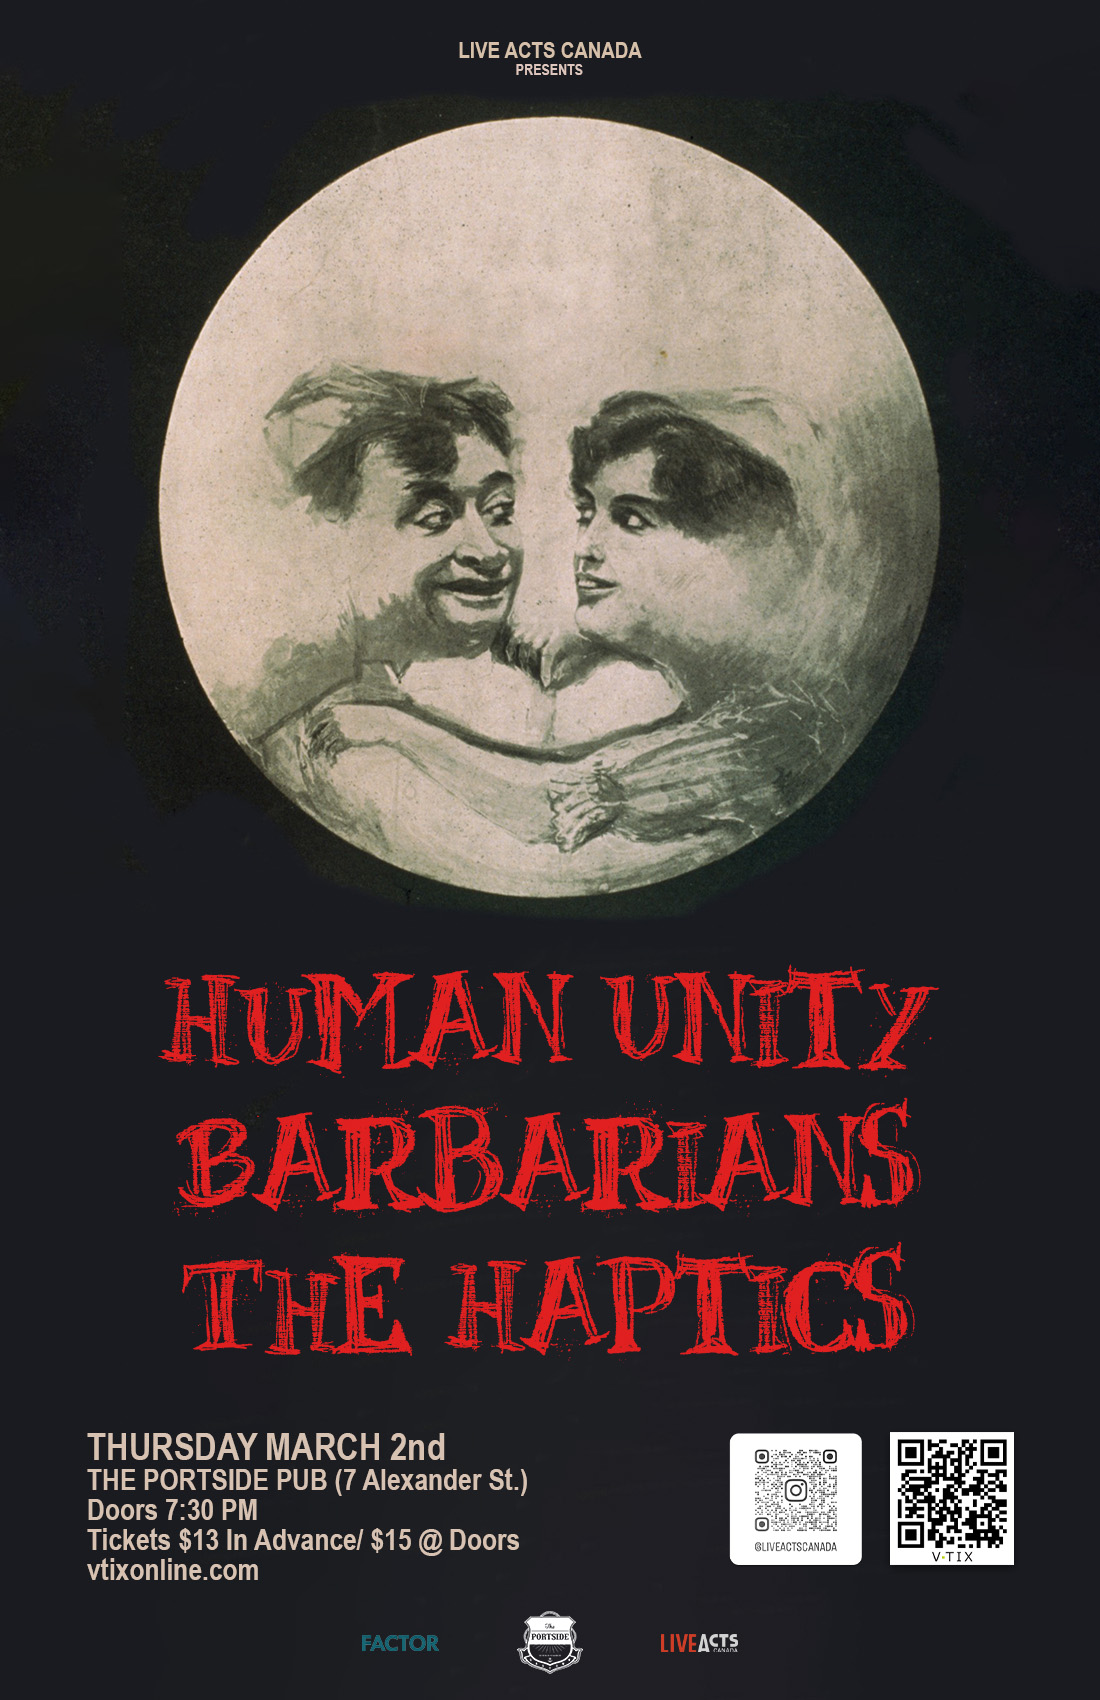 Human Unity with Special Guests Barbarians and The Haptics